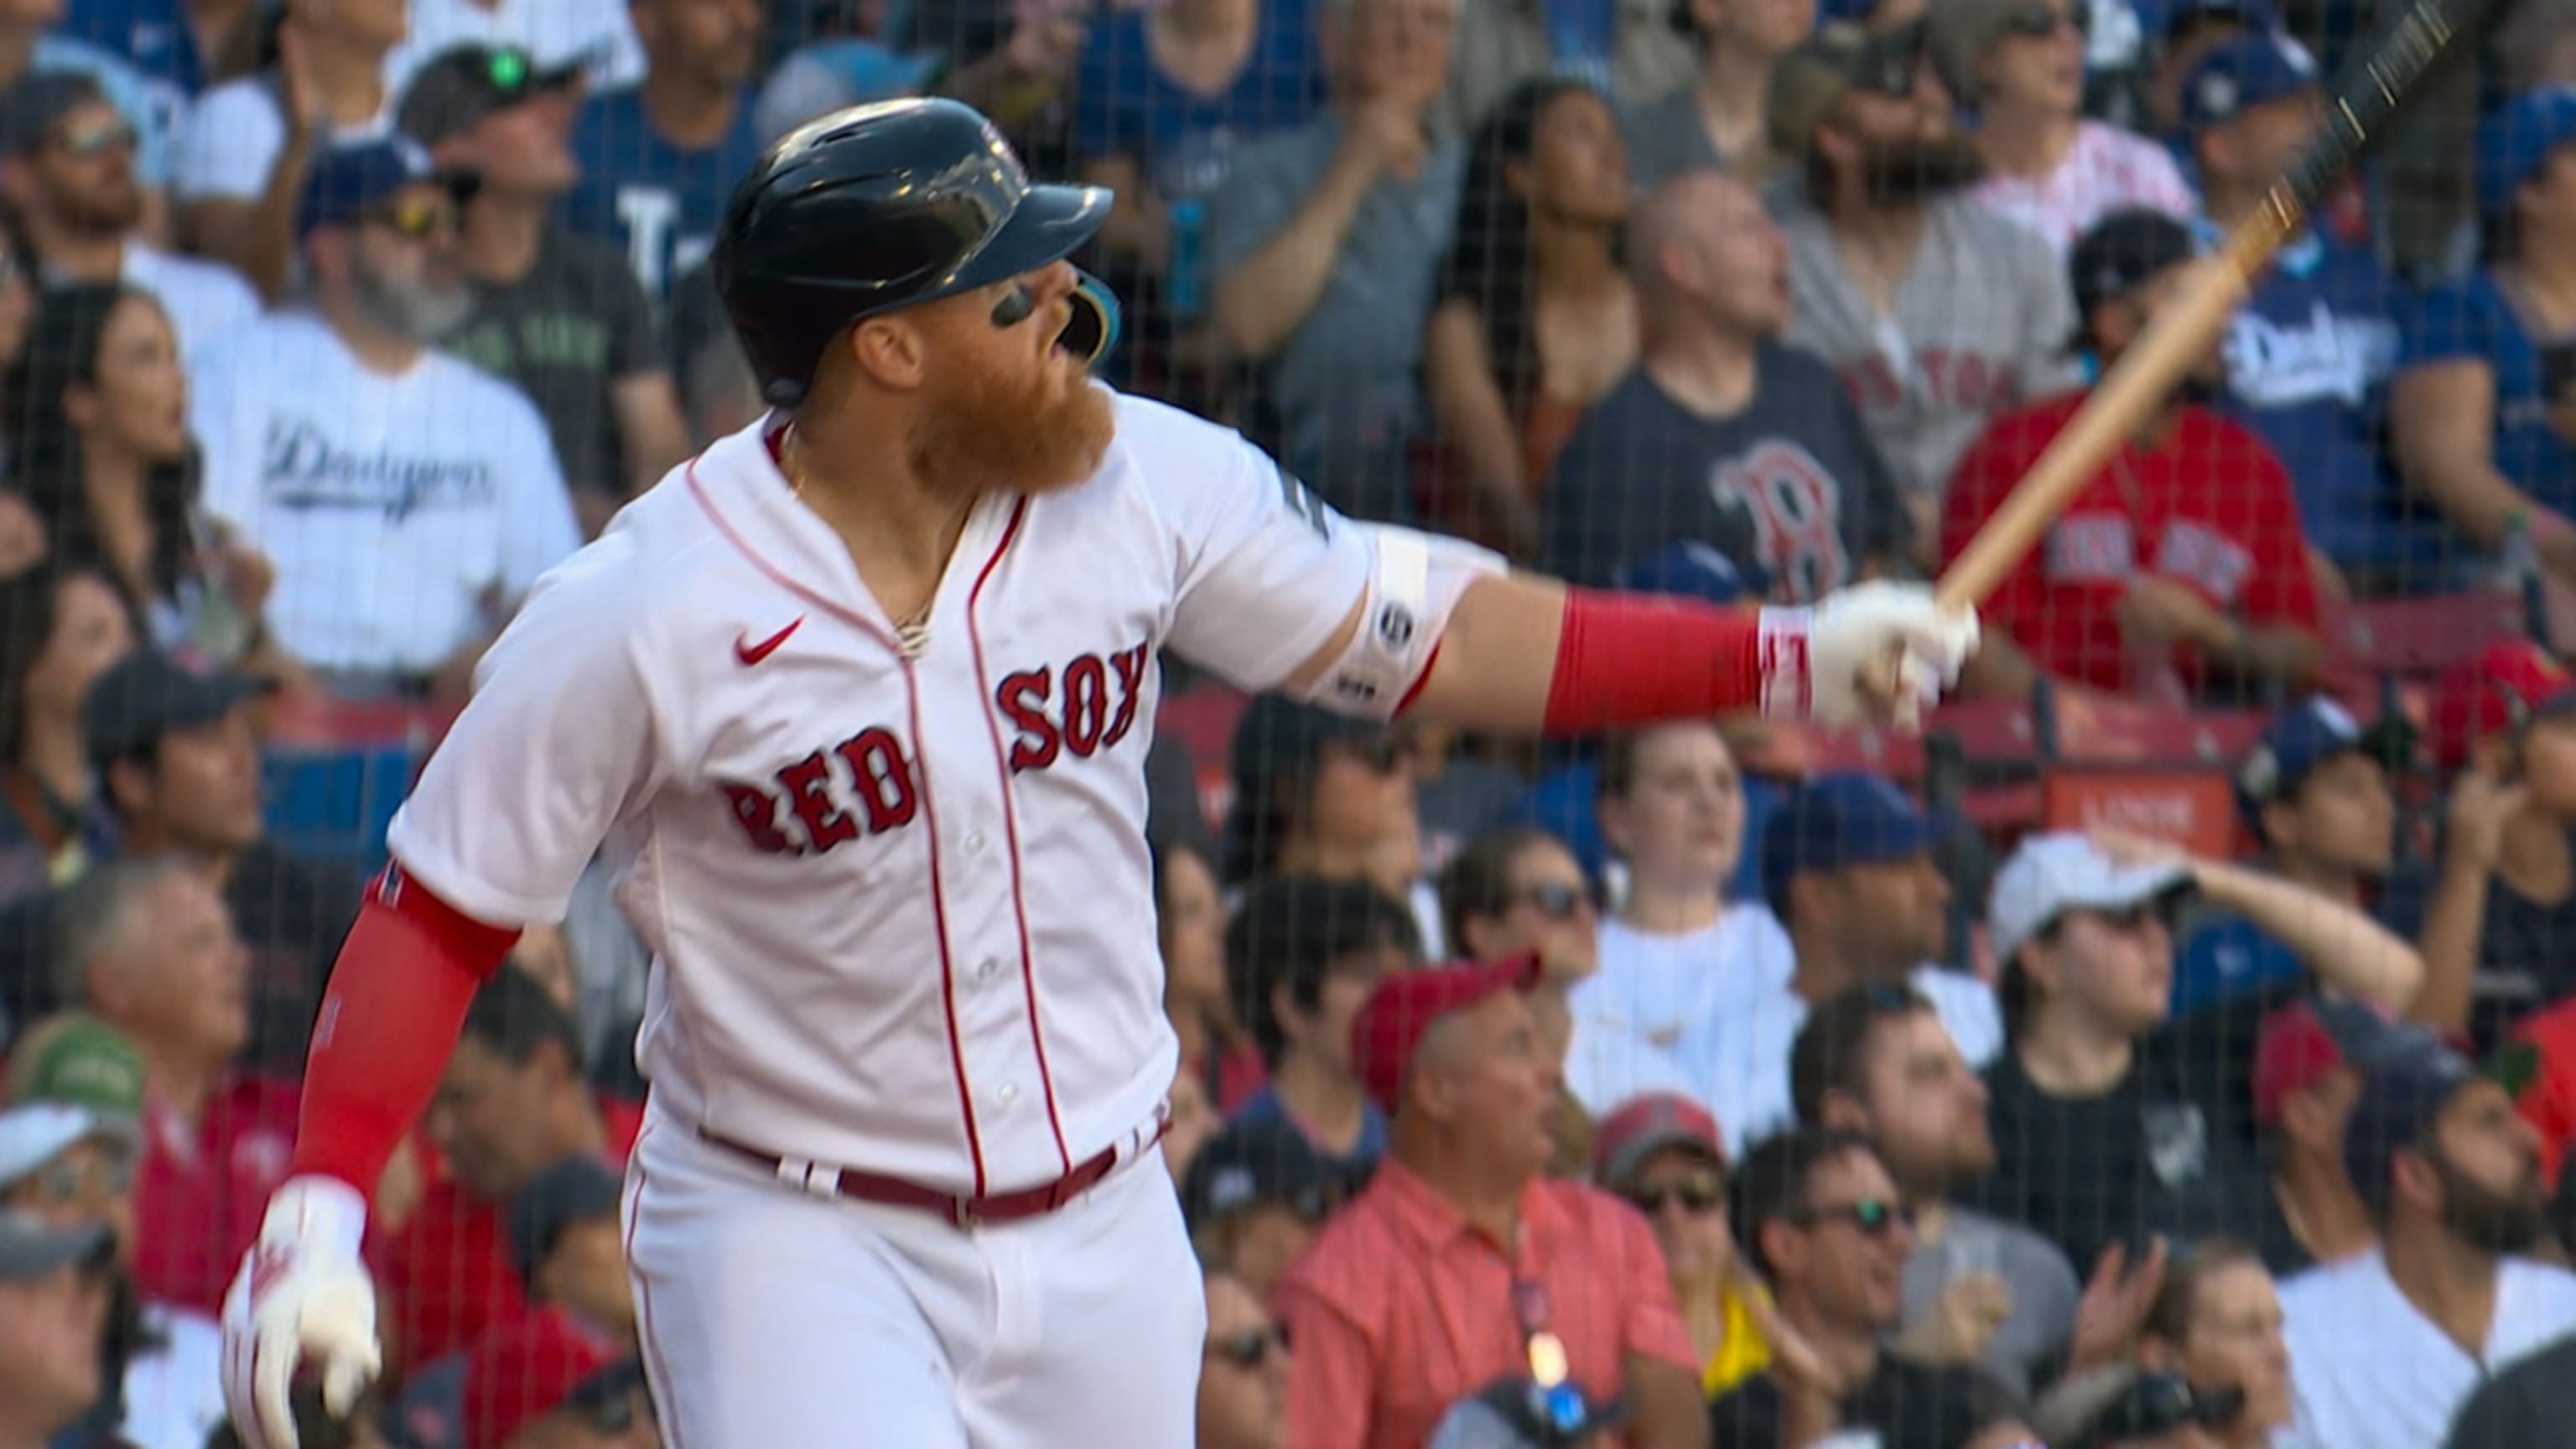 A new hero in town: It's Adam Duvall, whose walkoff homer wins it for Red  Sox, Red Sox